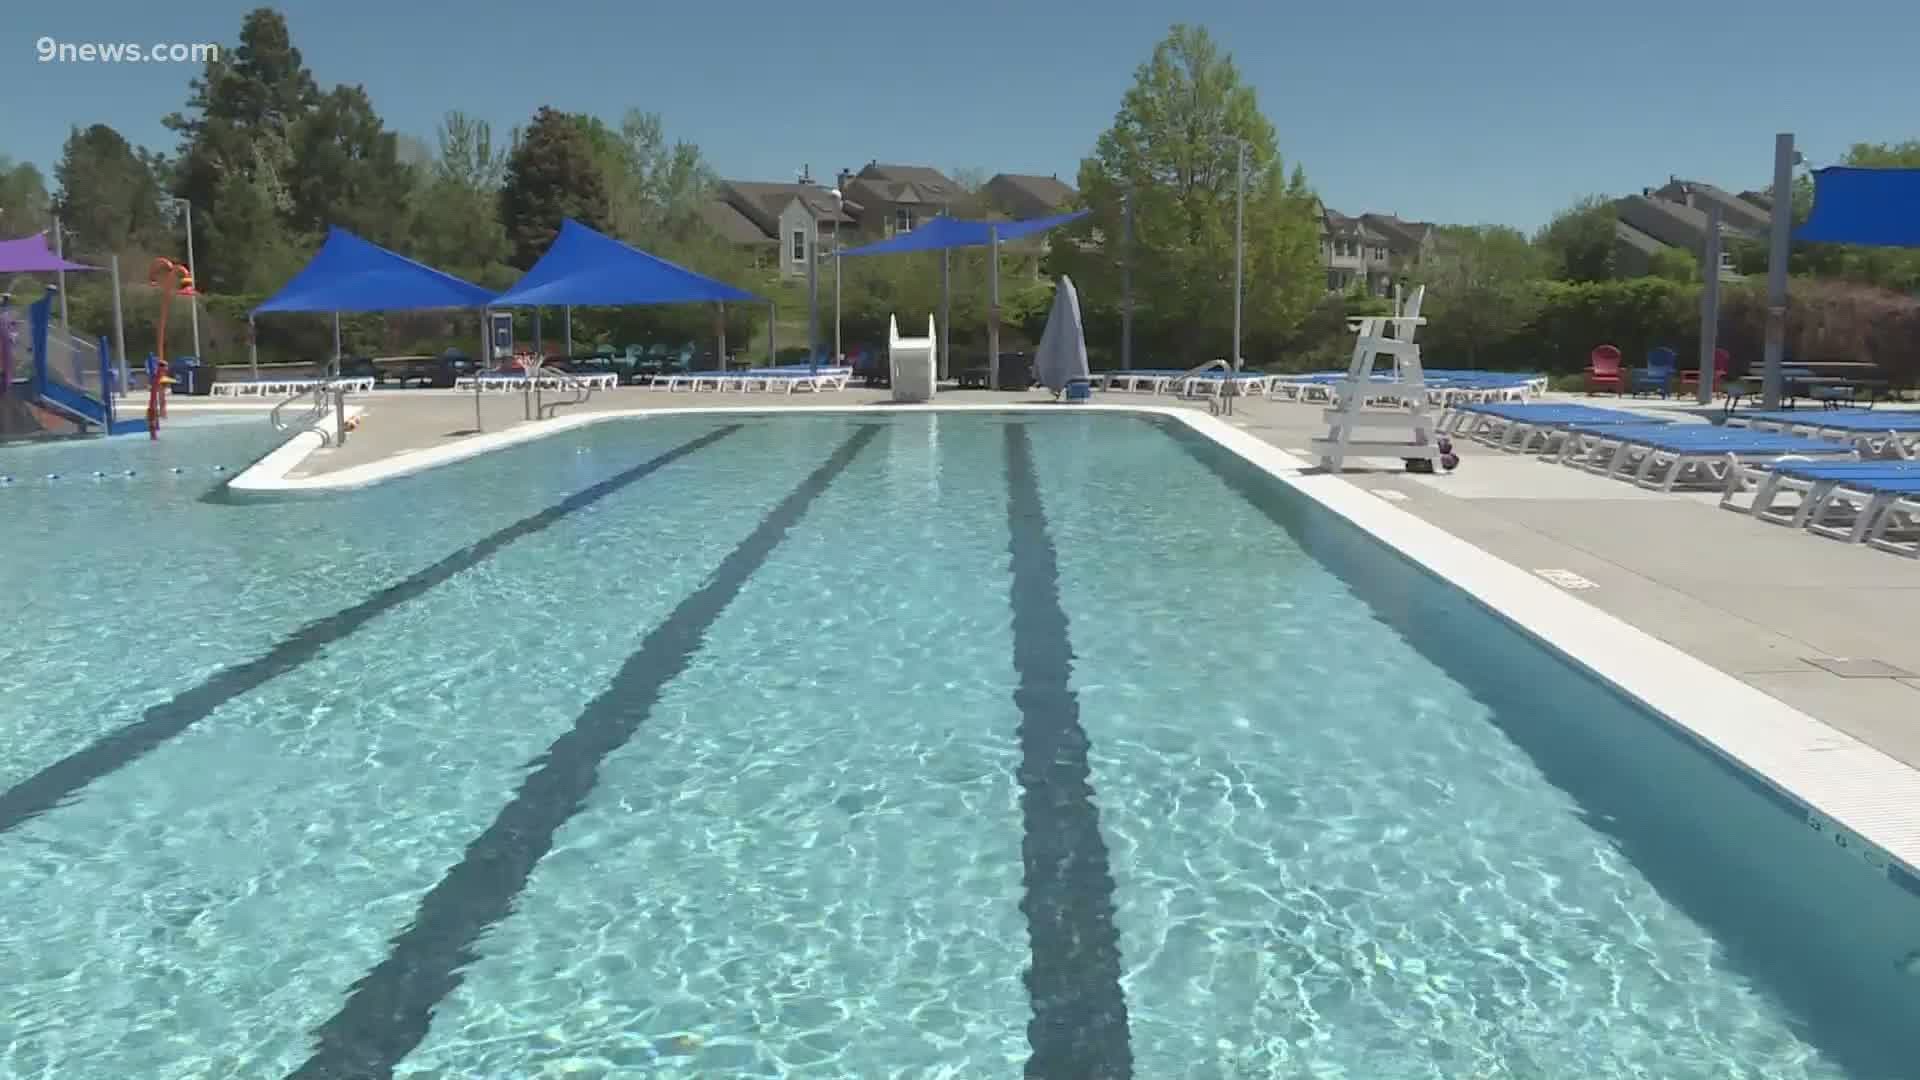 H2O’Brien Pool in Parker opens Saturday, after a shorted pool season in 2020.